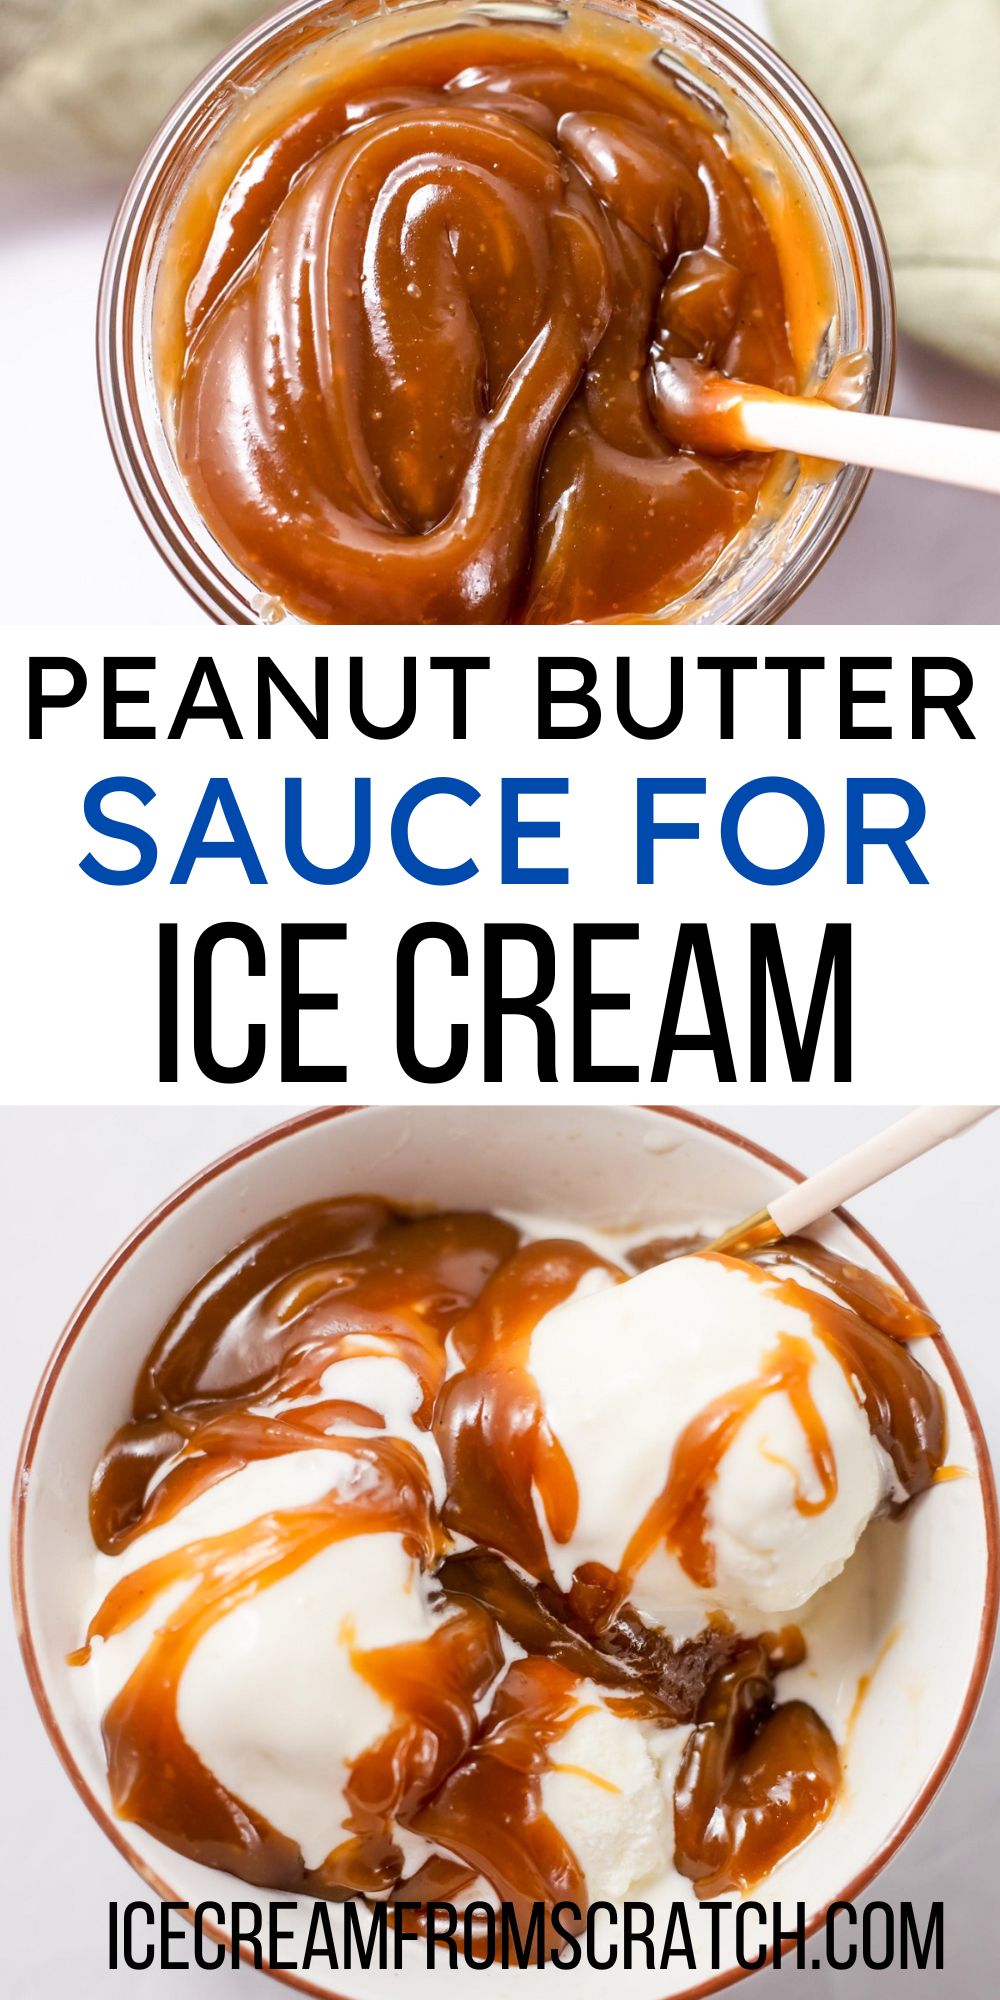 Two images of peanut butter sauce. Text in center says "peanut butter sauce for ice cream"